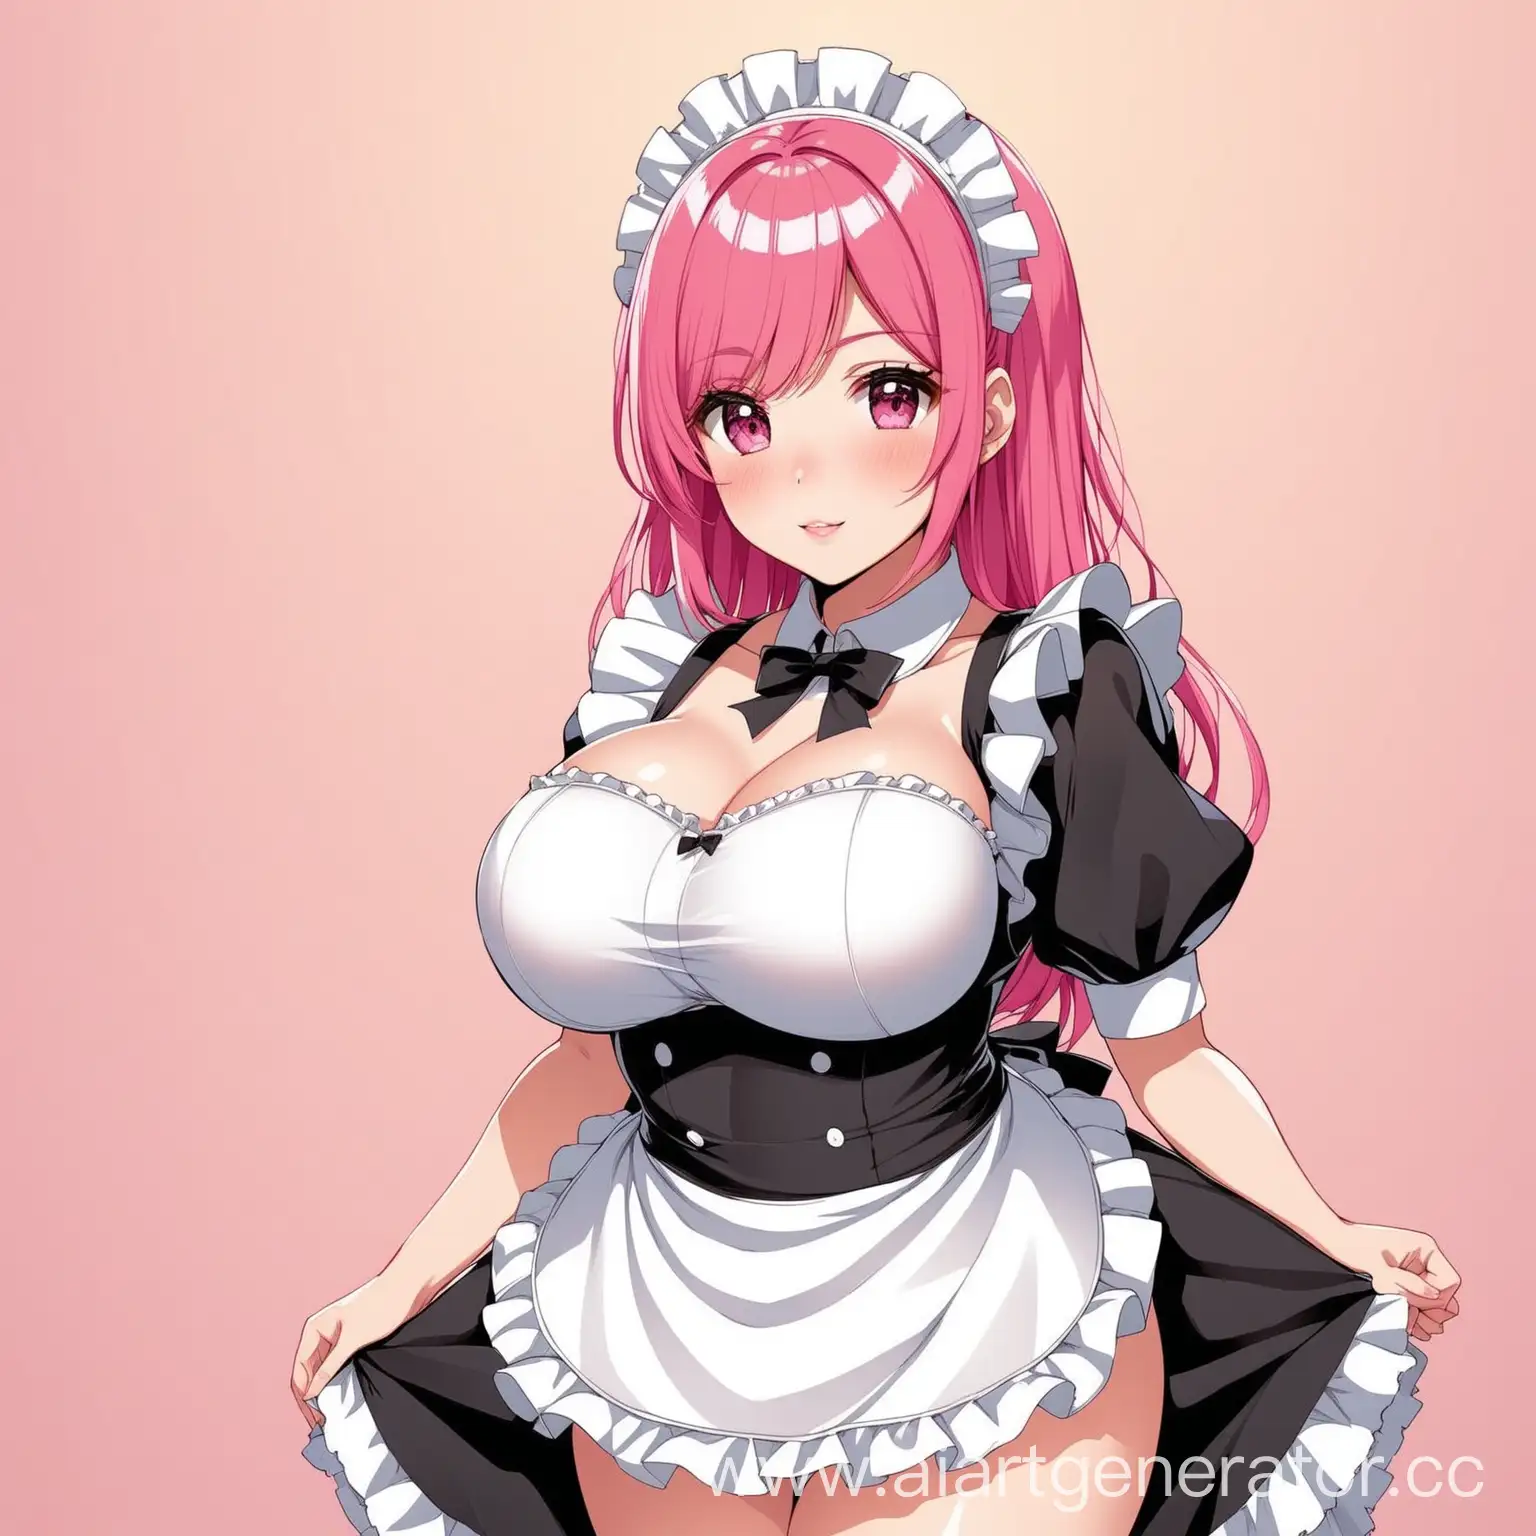 Maid-Costume-PinkHaired-Girl-with-Playful-Features